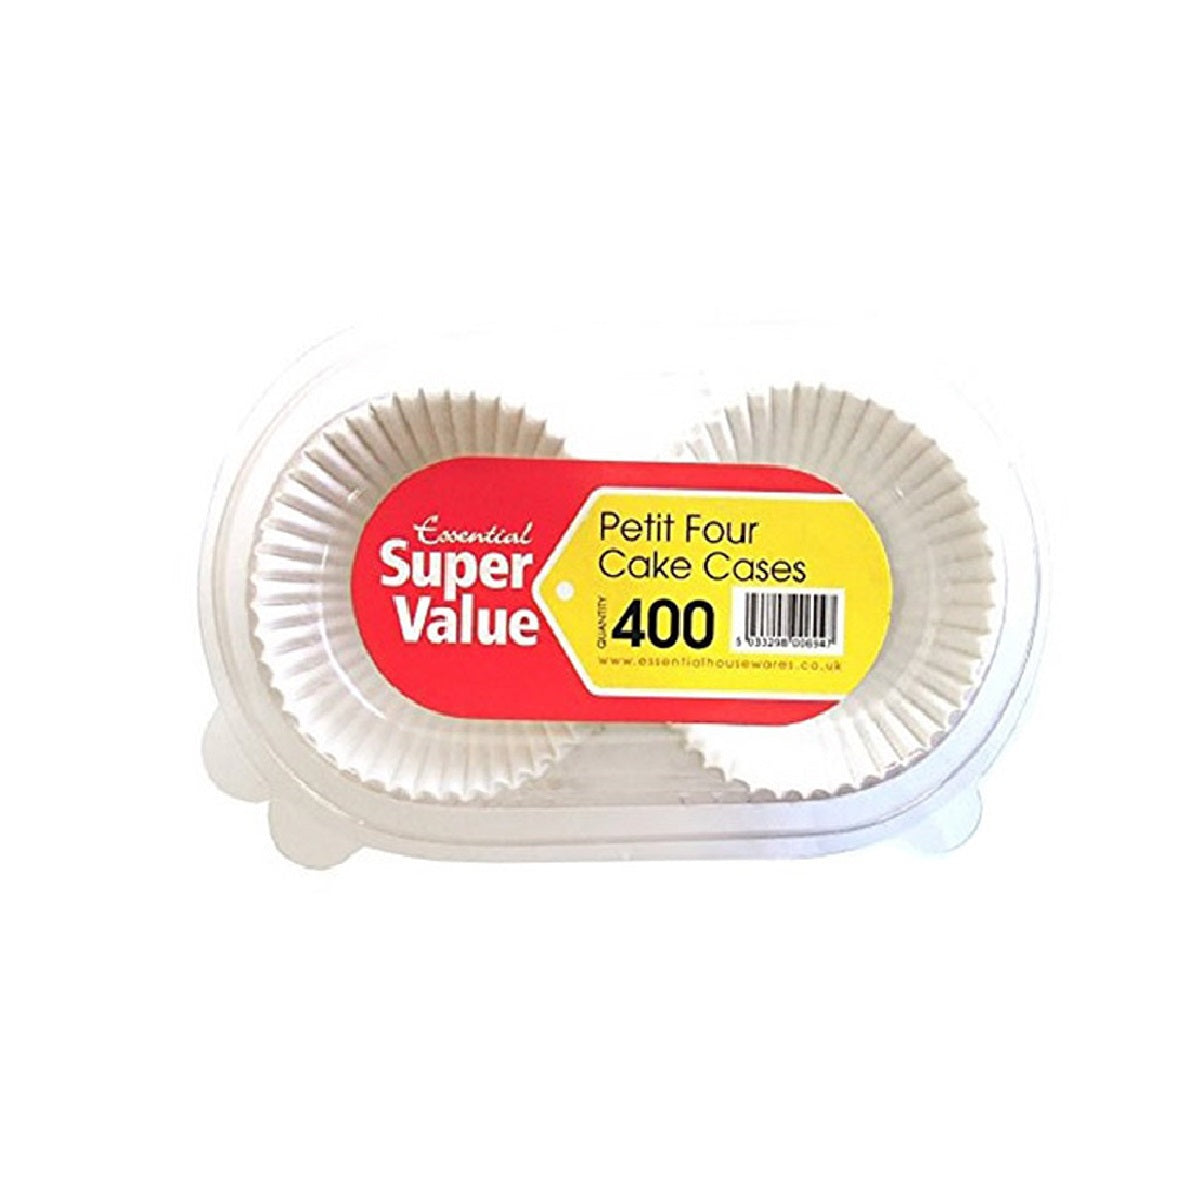 Essential - Petit Four Cake Cases - 400 Pack - Continental Food Store